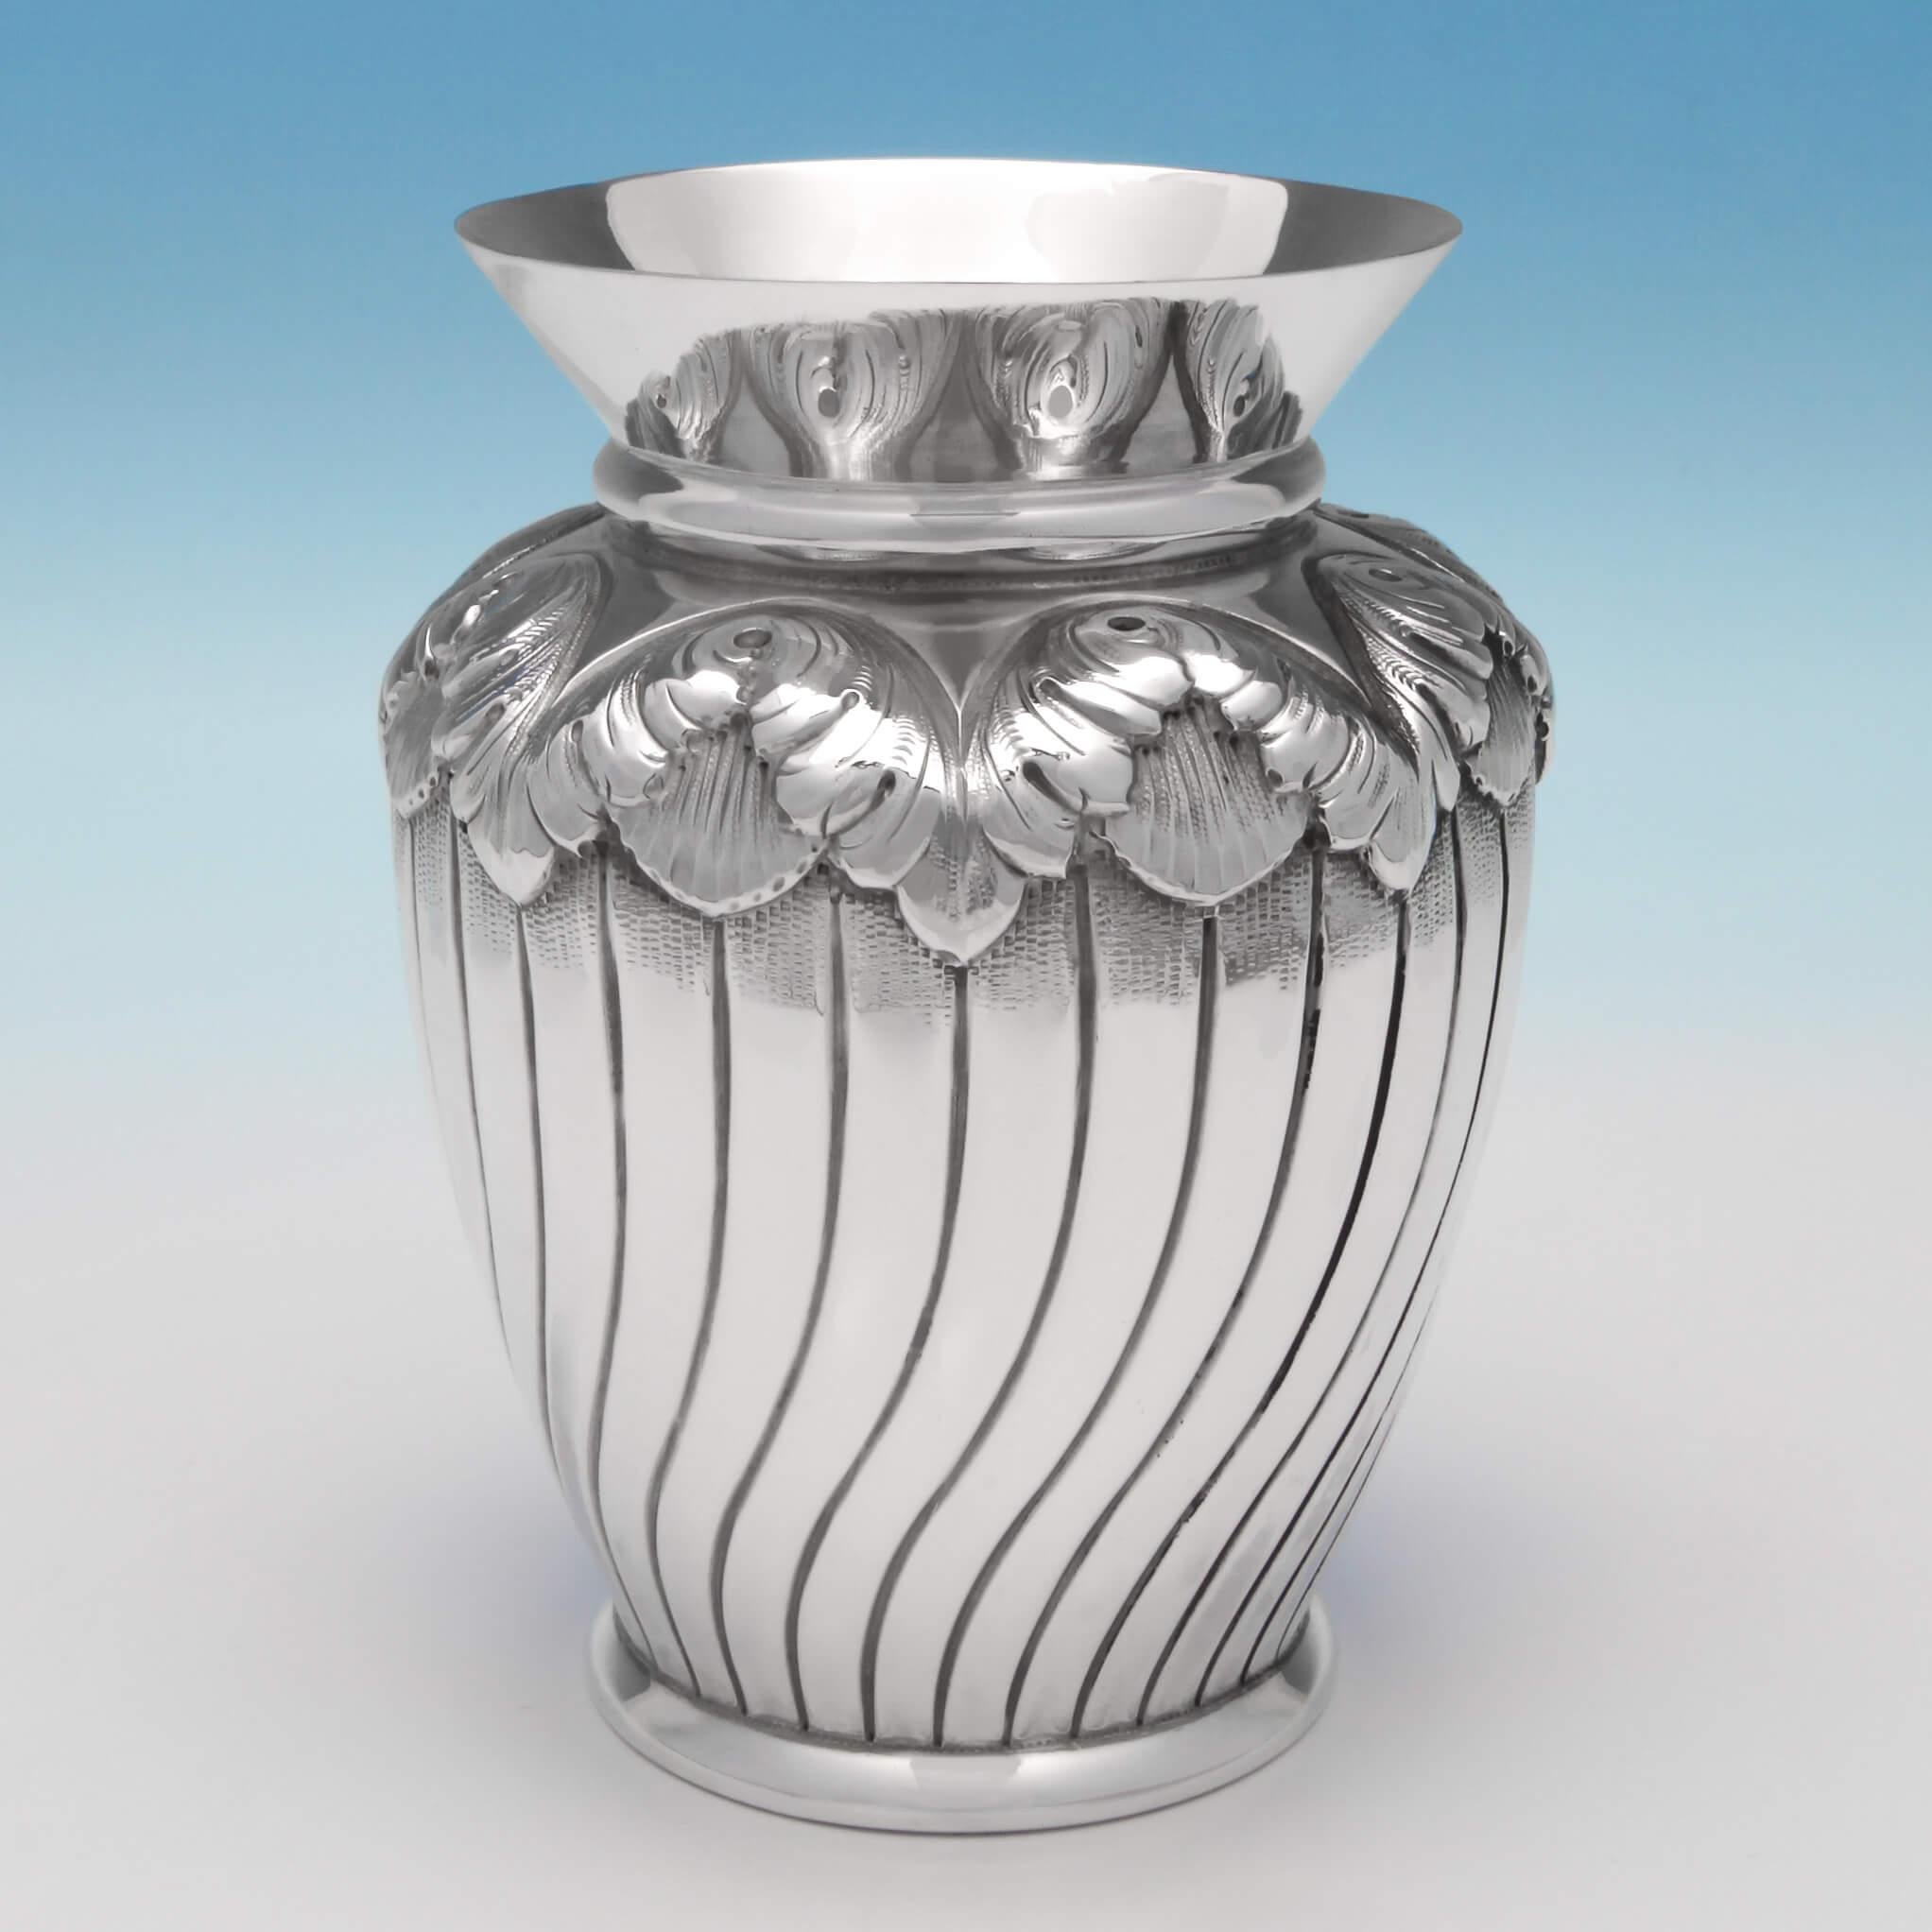 Hallmarked in London in 1893 by Edward Hutton, this very attractive, Antique, Victorian, Sterling Silver Set of Four Vases has acanthus decoration, and swirled fluting. Each vase measures 4.5